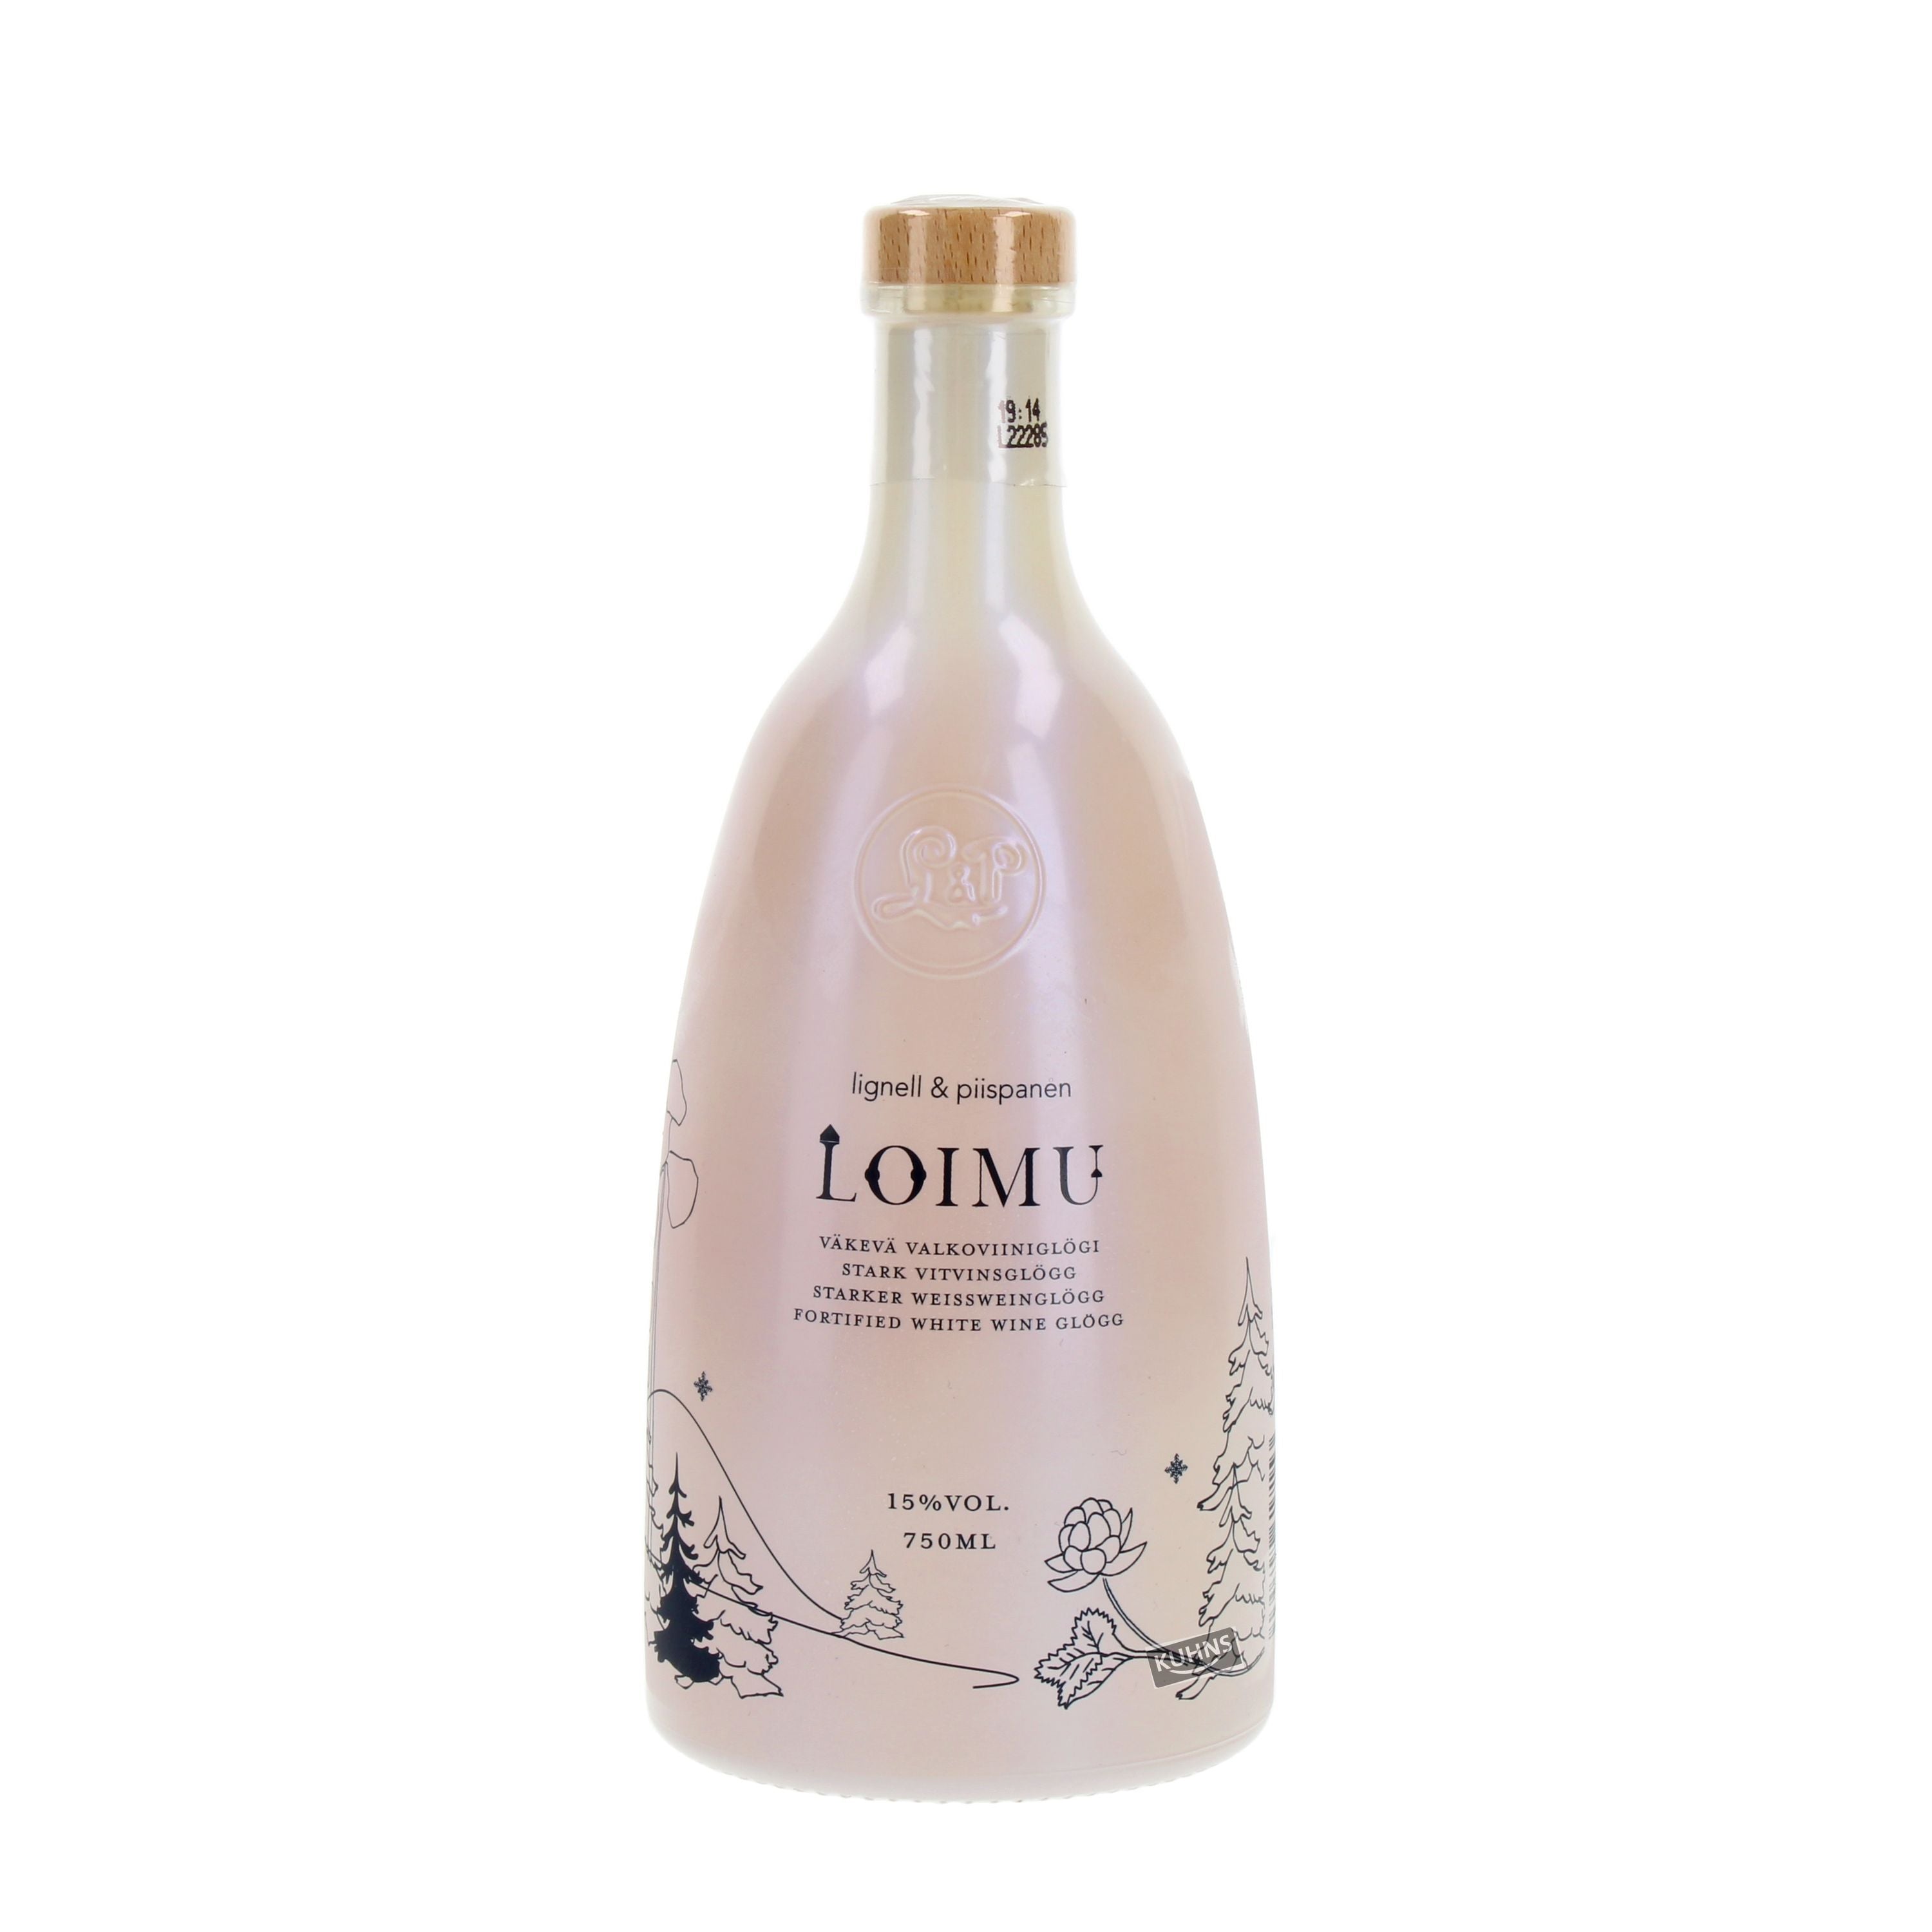 Loimu White mulled wine from Finland 0.75l, alc. 15% by volume